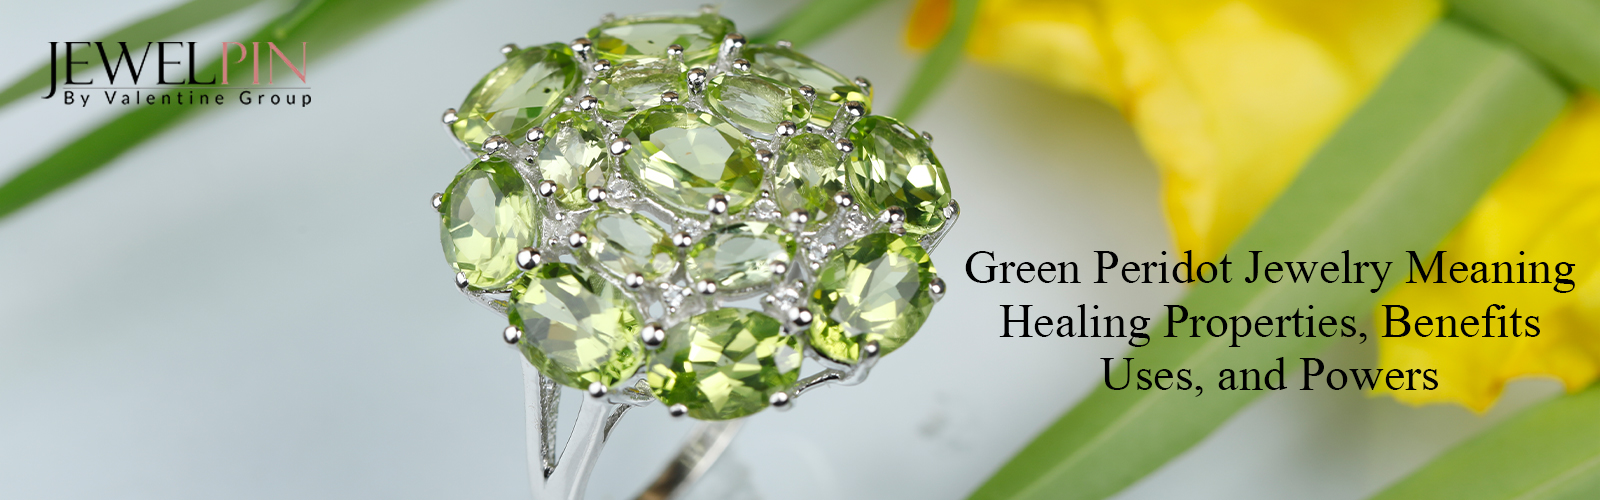 green peridot jewellery meaning healing properties benefits uses and powers